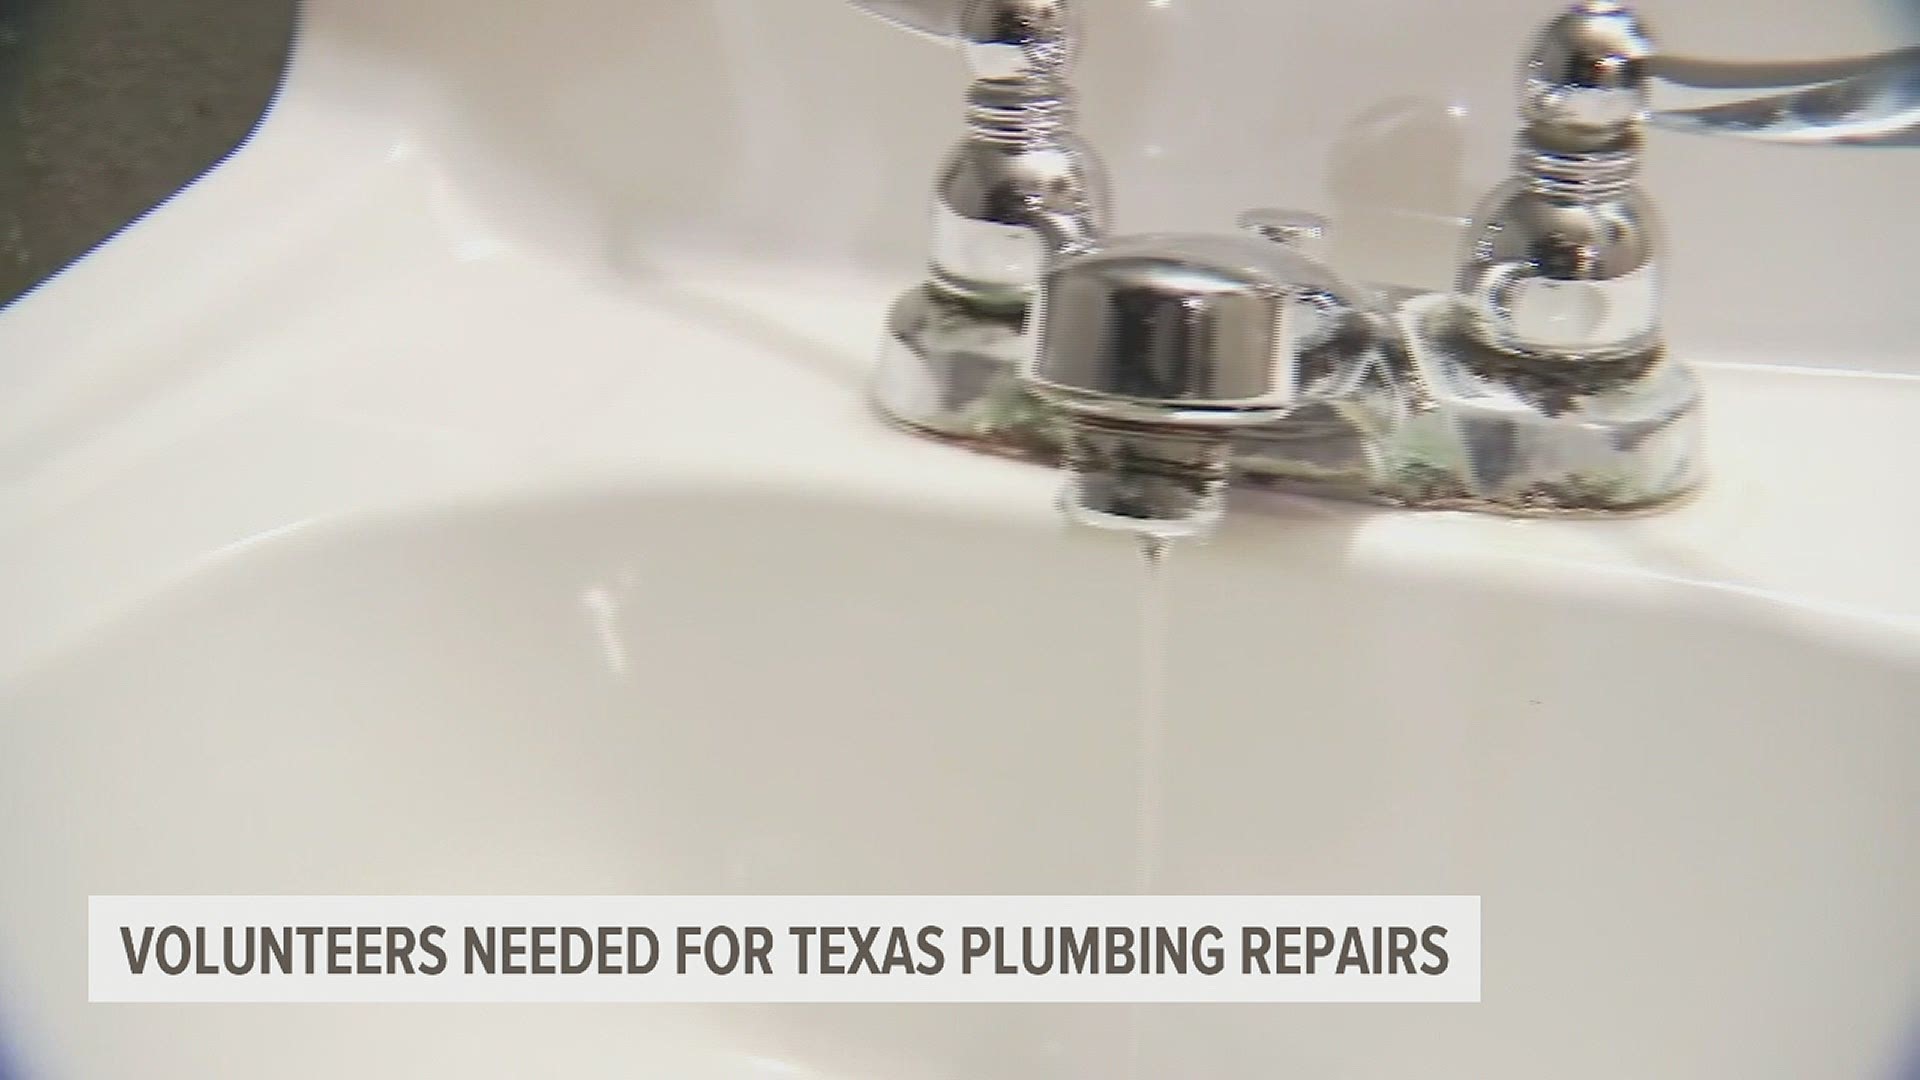 Mennonite Disaster Service (MDS) is looking for volunteers who have plumbing experience, to head down to Texas and help with recovery efforts.